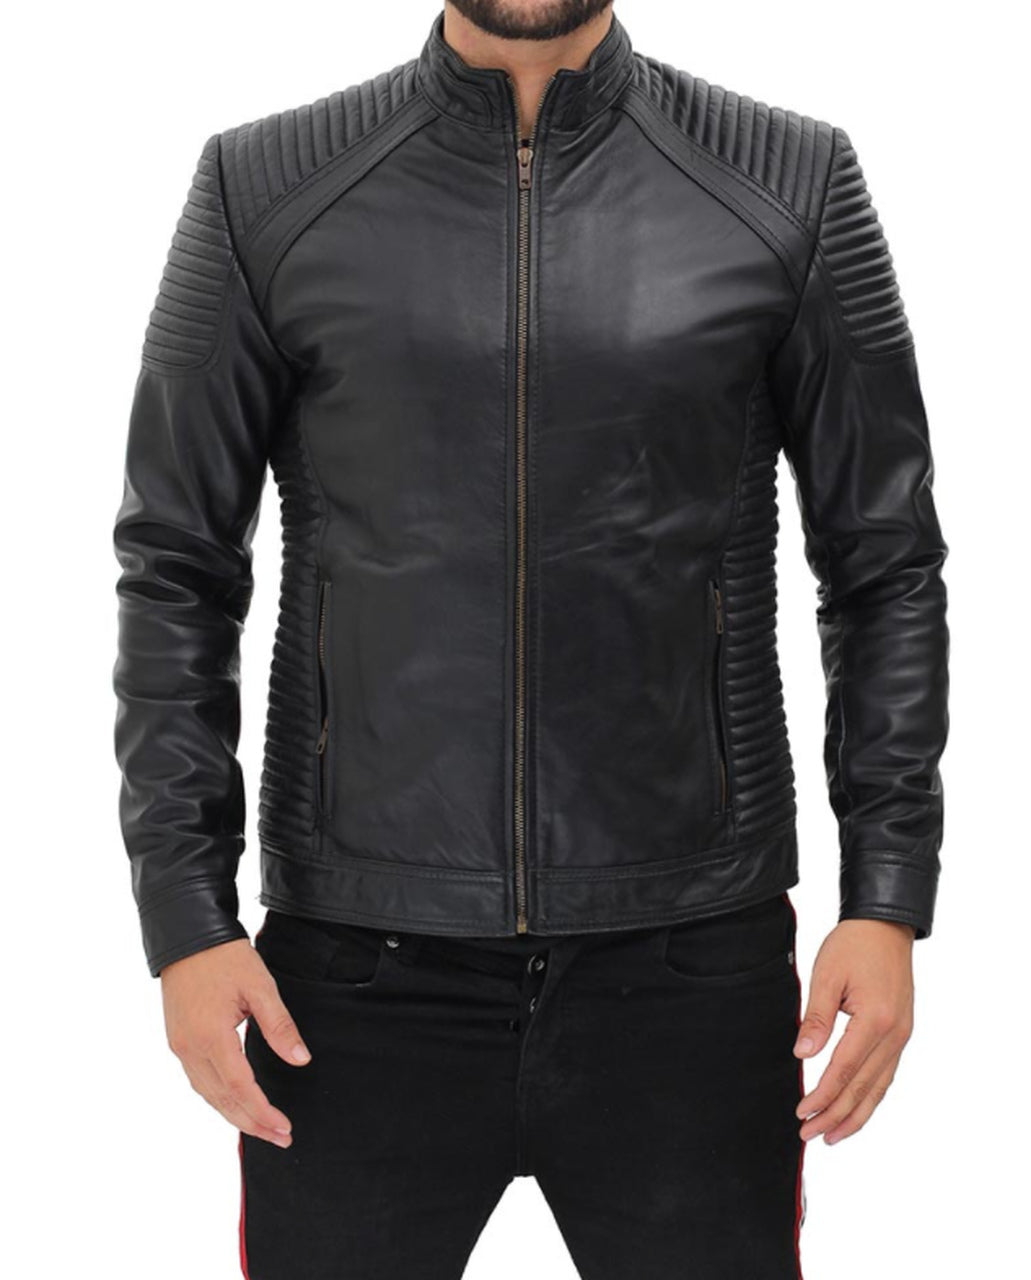 Mush Editions Men Fitted Genuine Leather Jacket with Shoulder Lining Padding Xs / Black